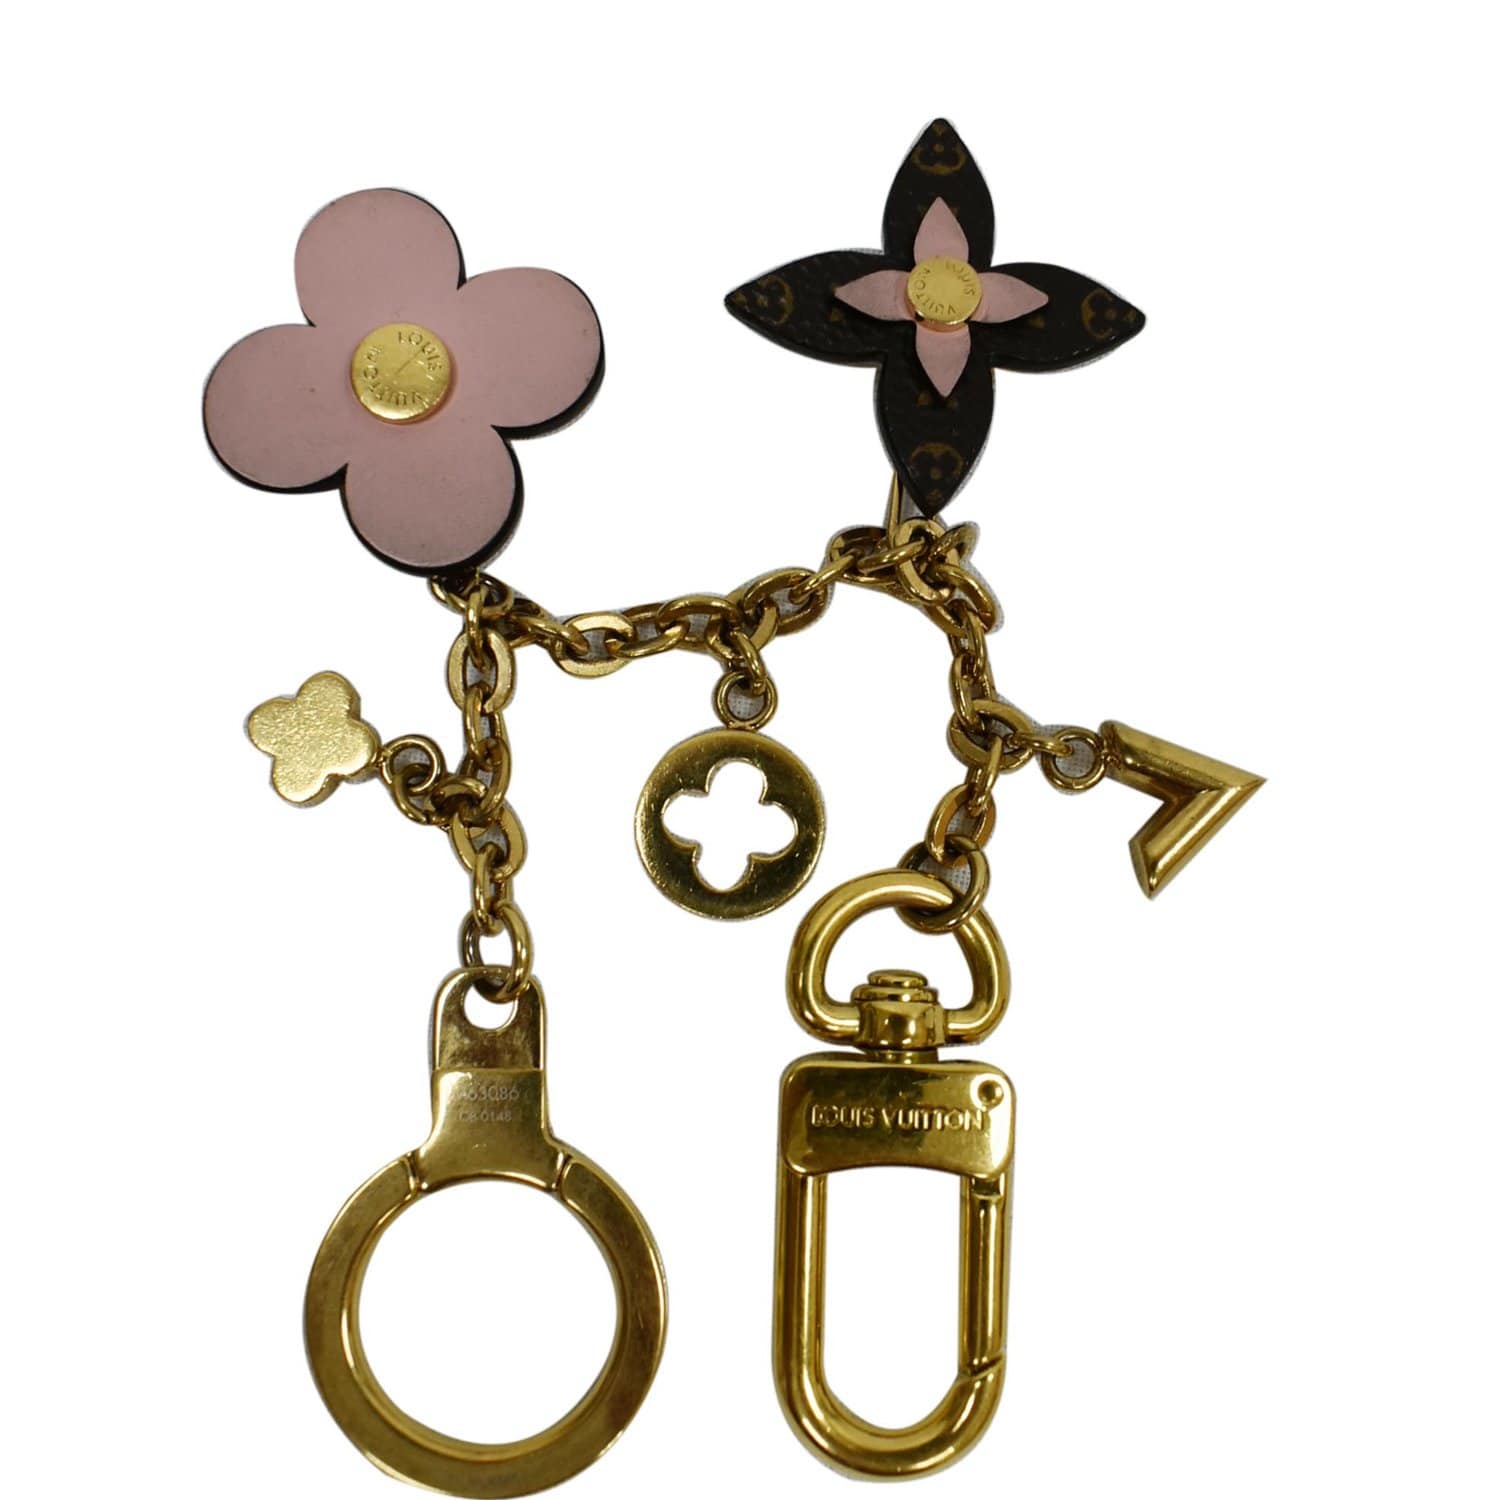 Blooming Flowers Chain Bag Charm S00 - Women - Accessories